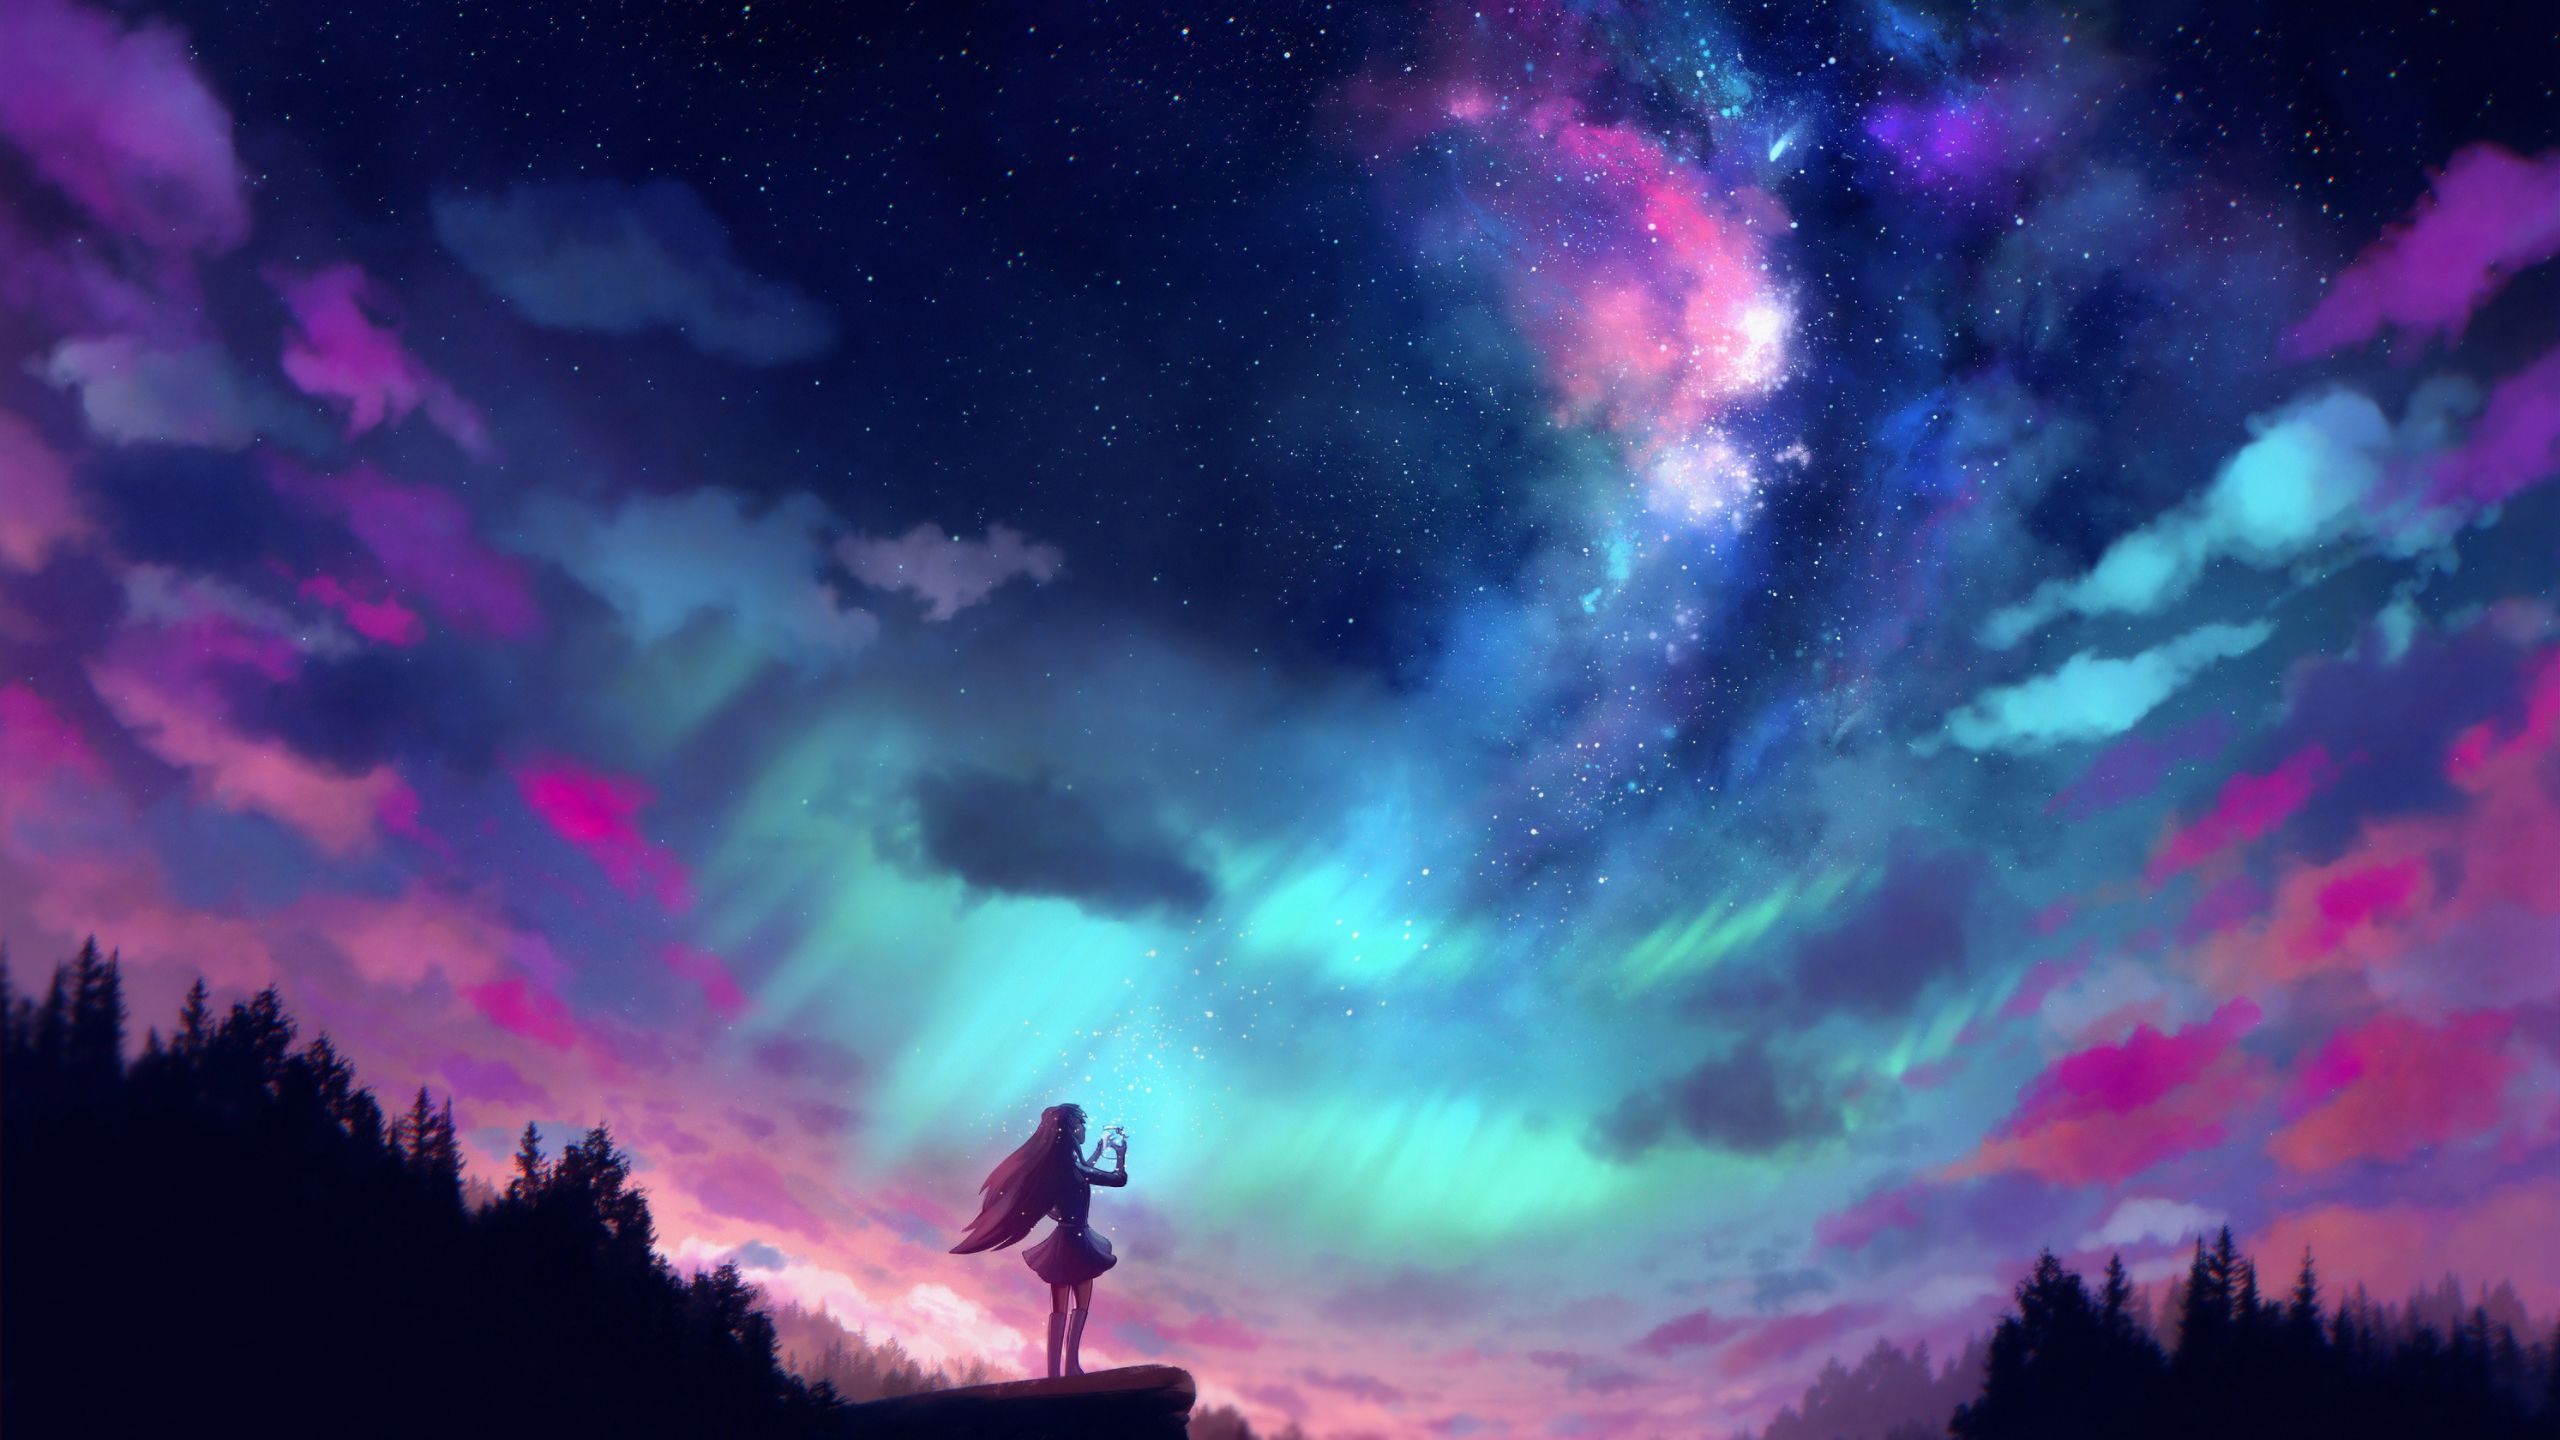 Catching The Stars 1440P Resolution Wallpaper, HD Anime